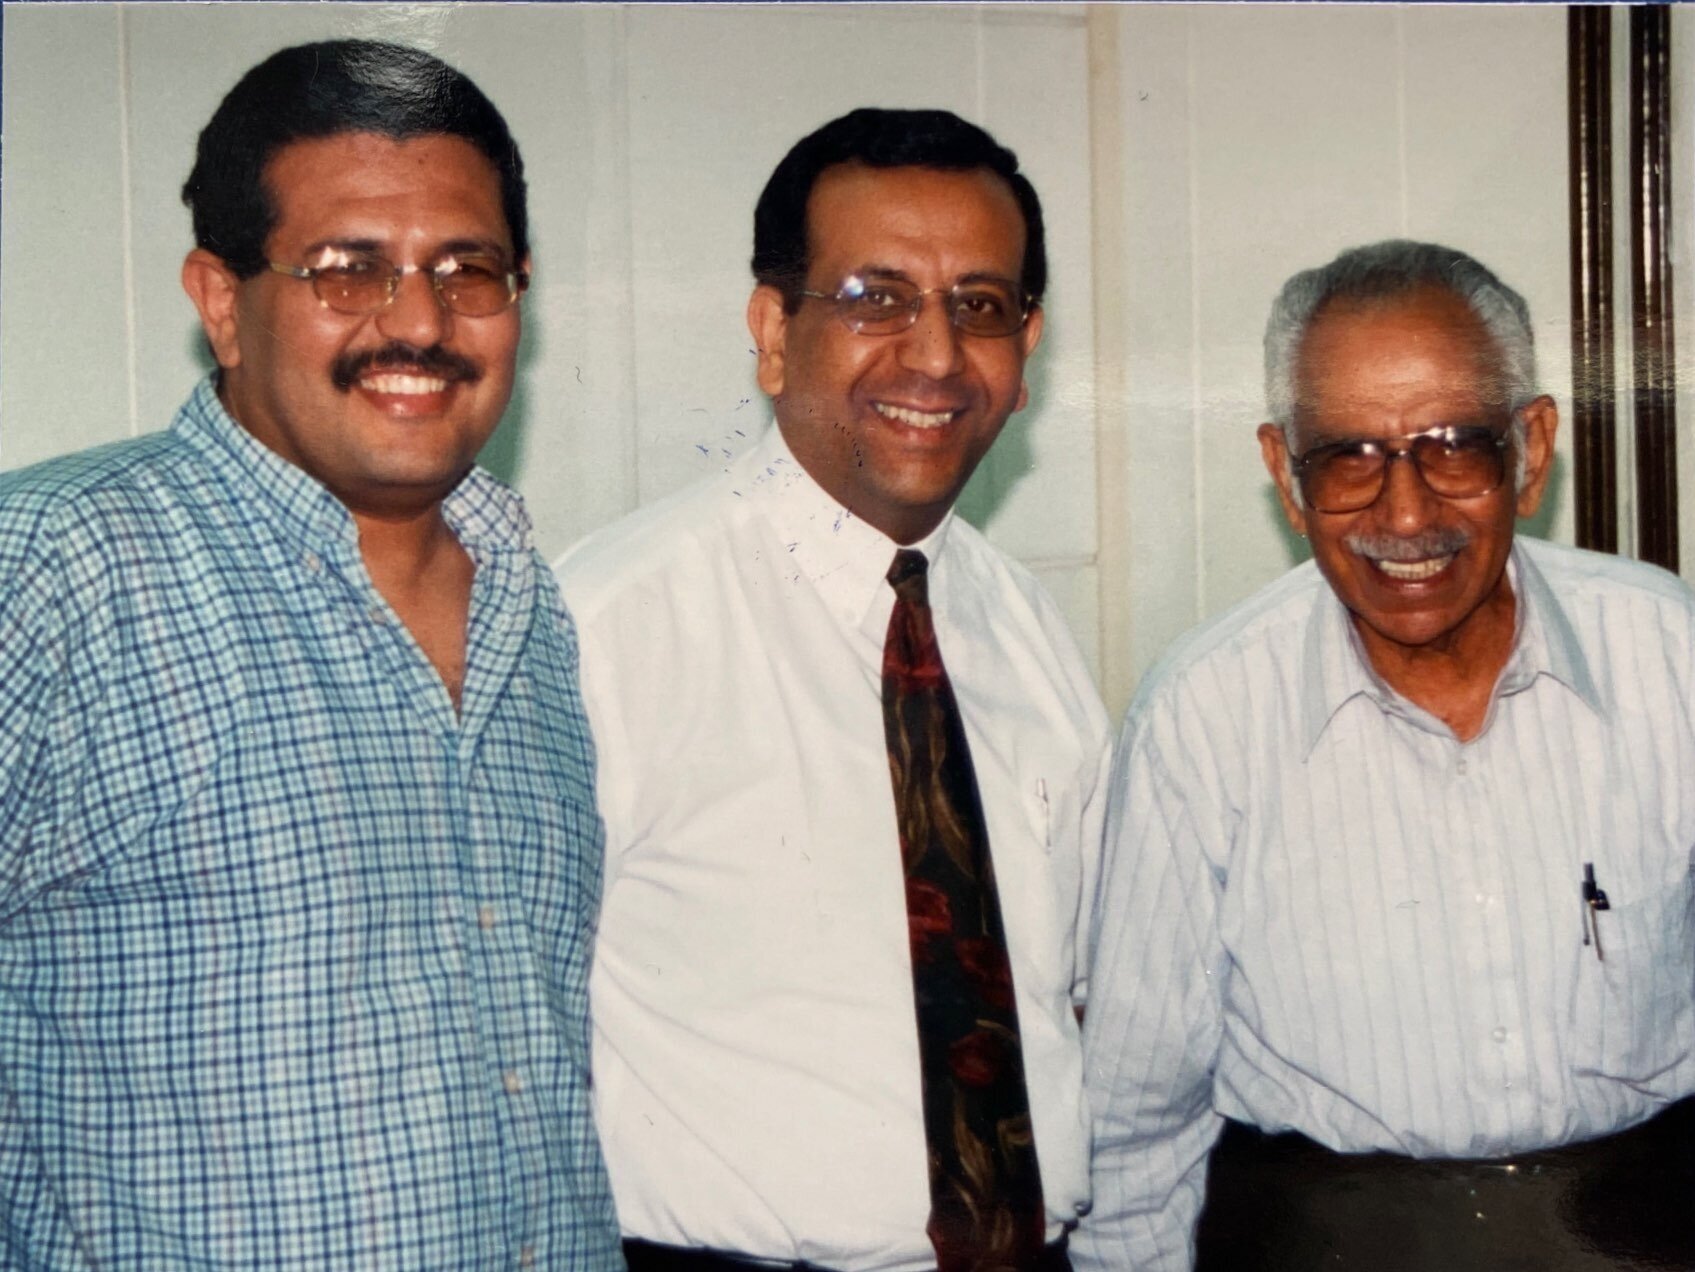  Drs. Tharwat, Atef and Swailem in 2002  